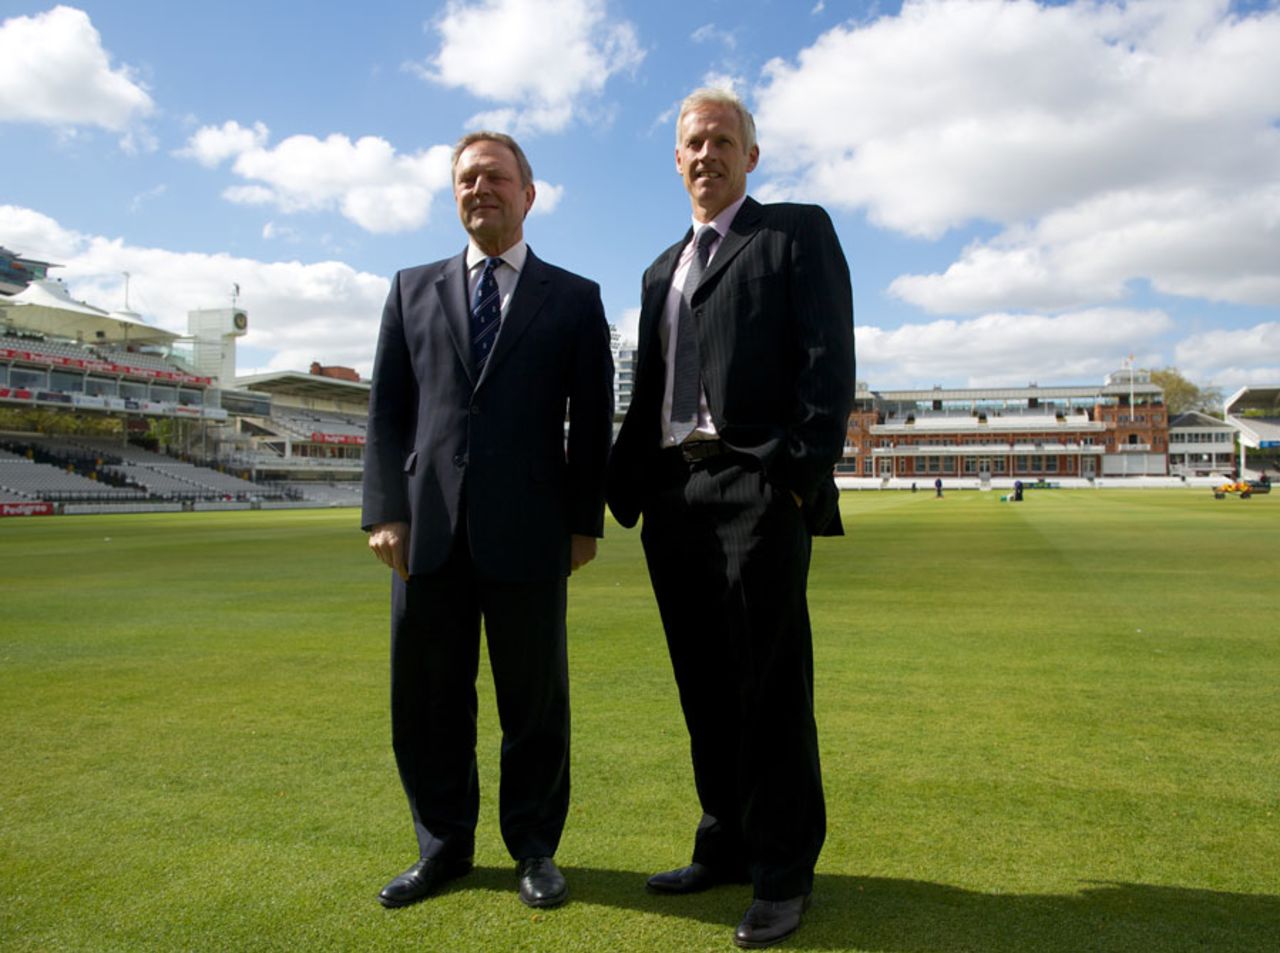 Paul Downton and Peter Moores will oversee England's fortunes, Lord's, April 19, 2014